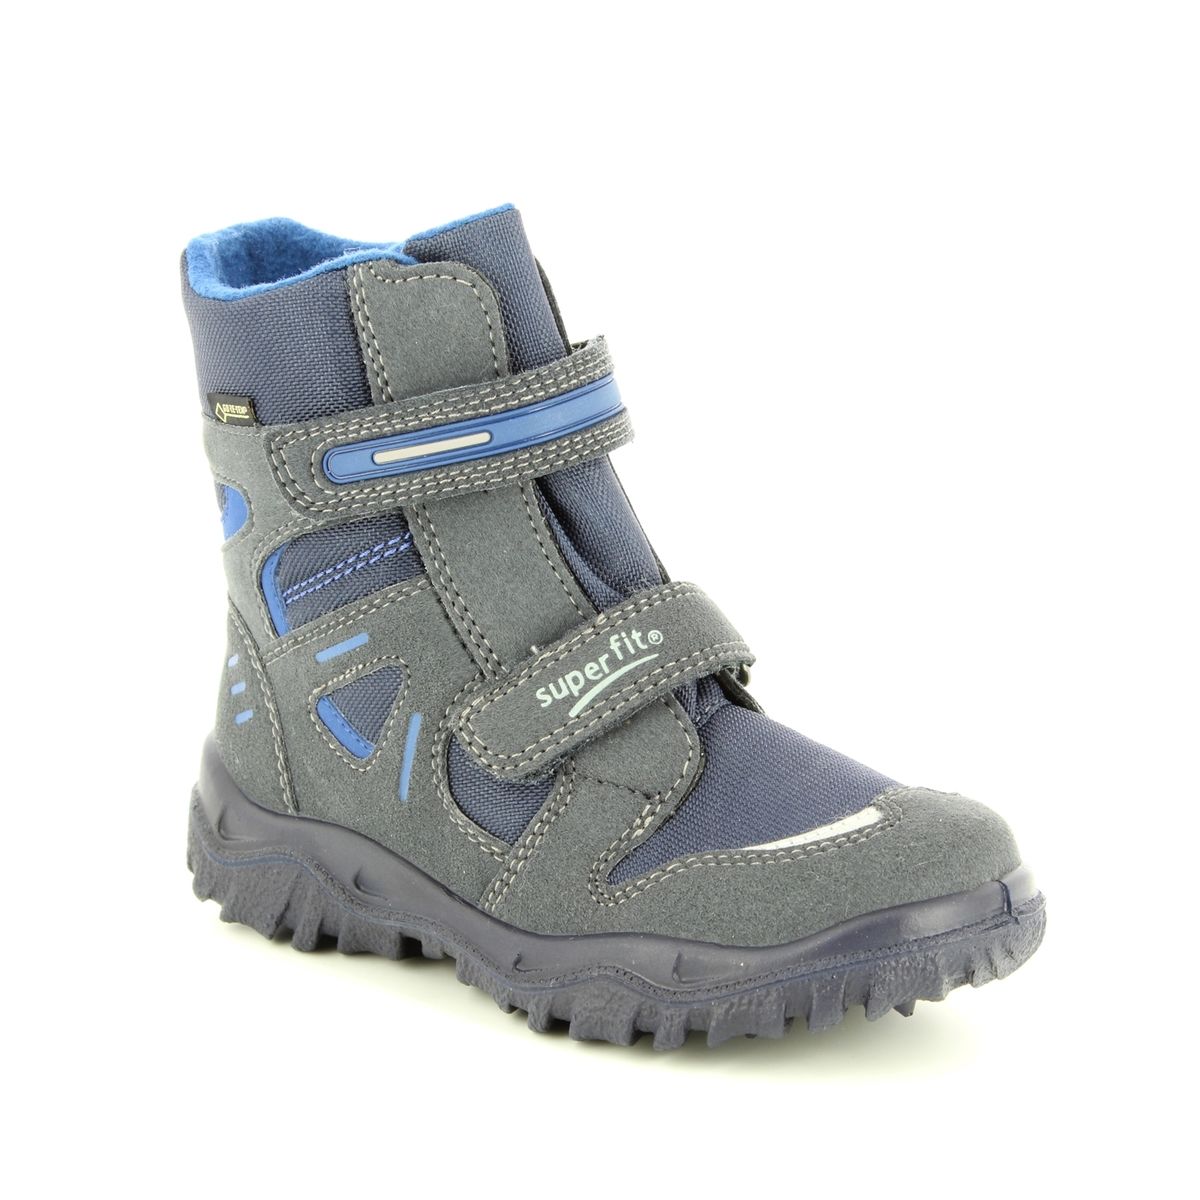 Superfit Husky Jnr Gore Navy Kids Boys Boots 09080-80 In Size 36 In Plain Navy For kids